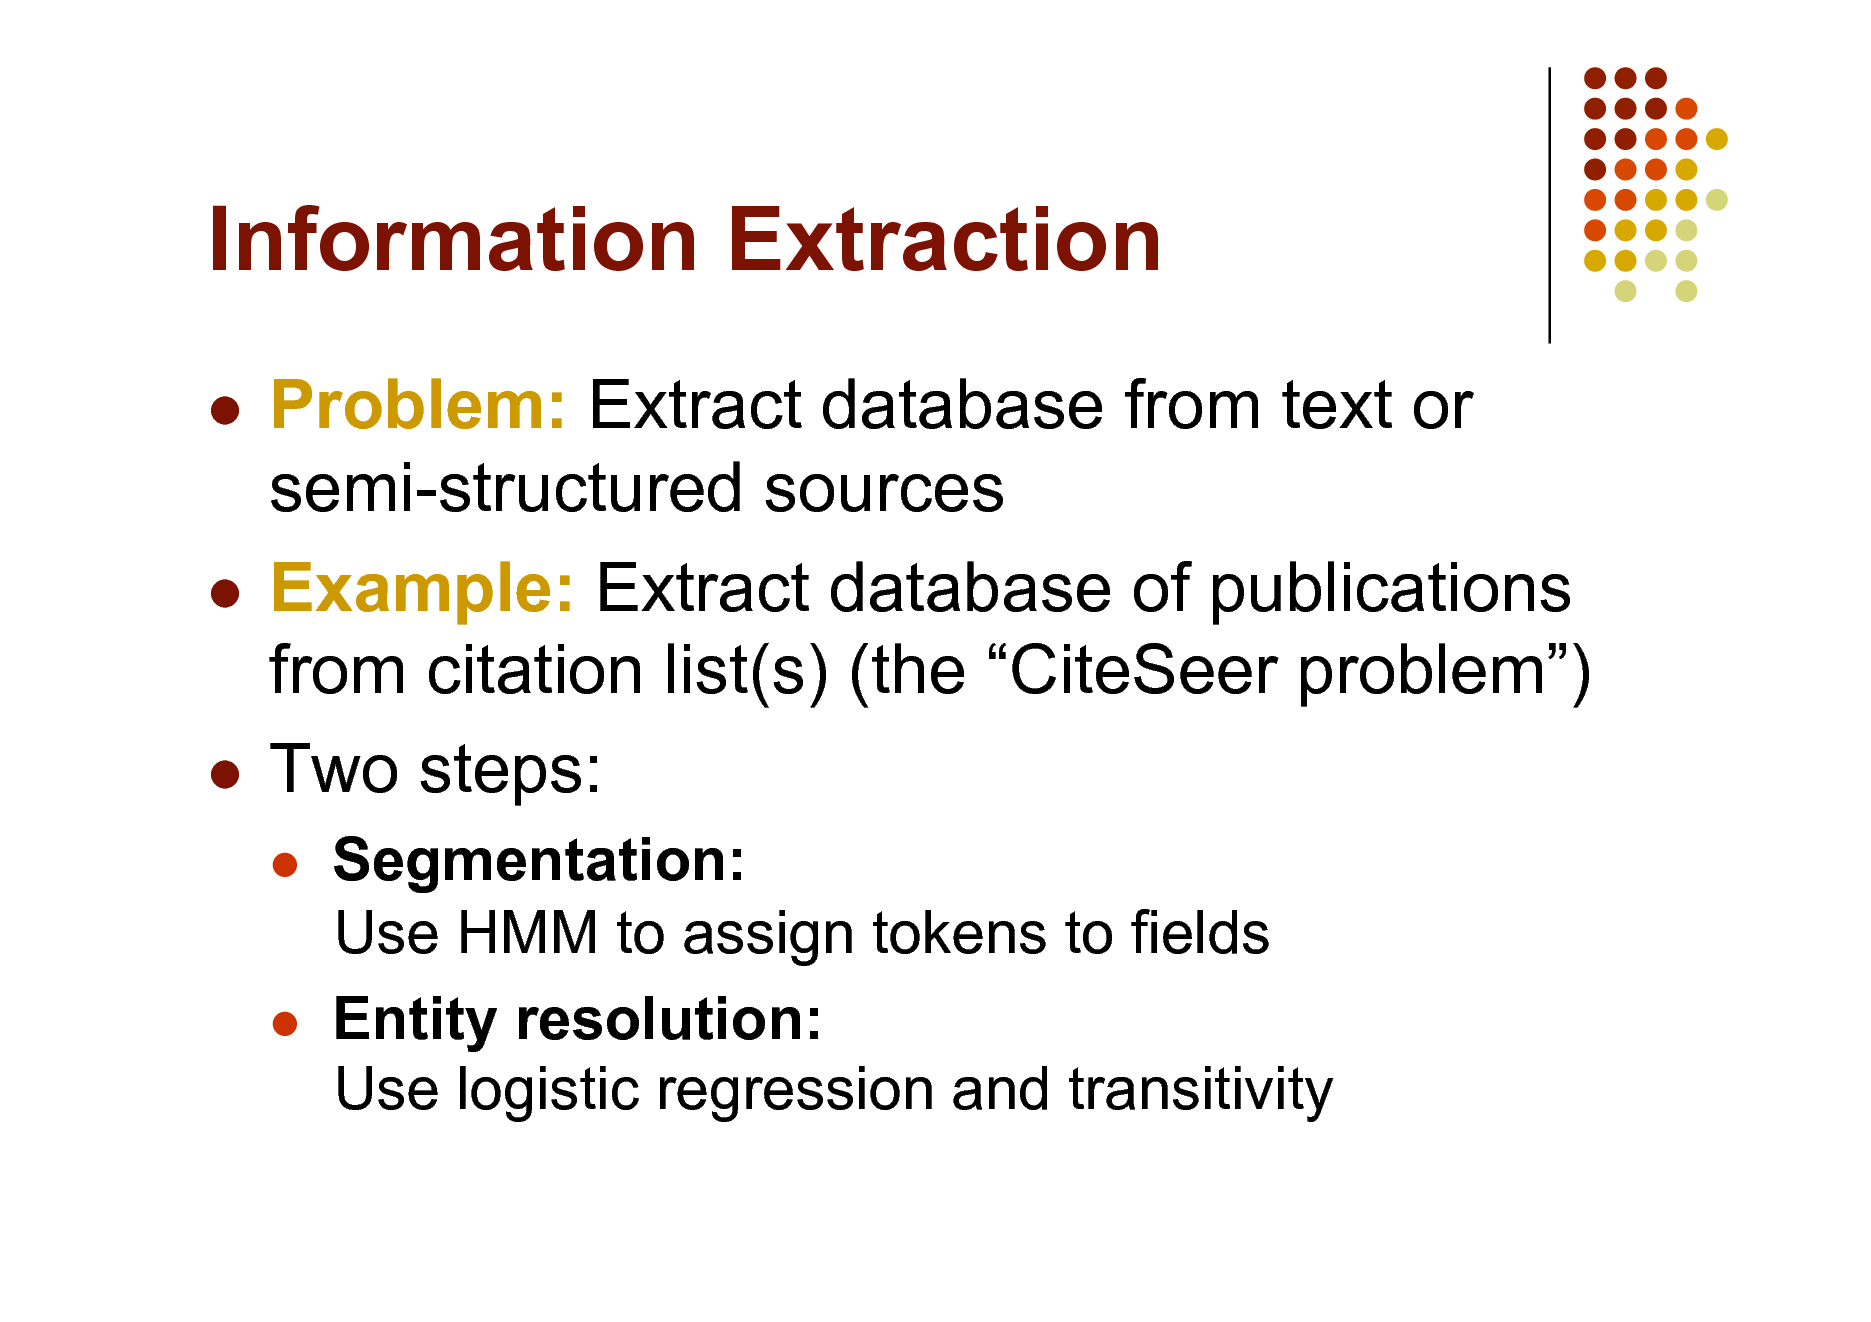 Slide: Information Extraction
Problem: Extract database from text or semi-structured sources  Example: Extract database of publications from citation list(s) (the CiteSeer problem)  Two steps:





Segmentation: Use HMM to assign tokens to fields Entity resolution: Use logistic regression and transitivity

